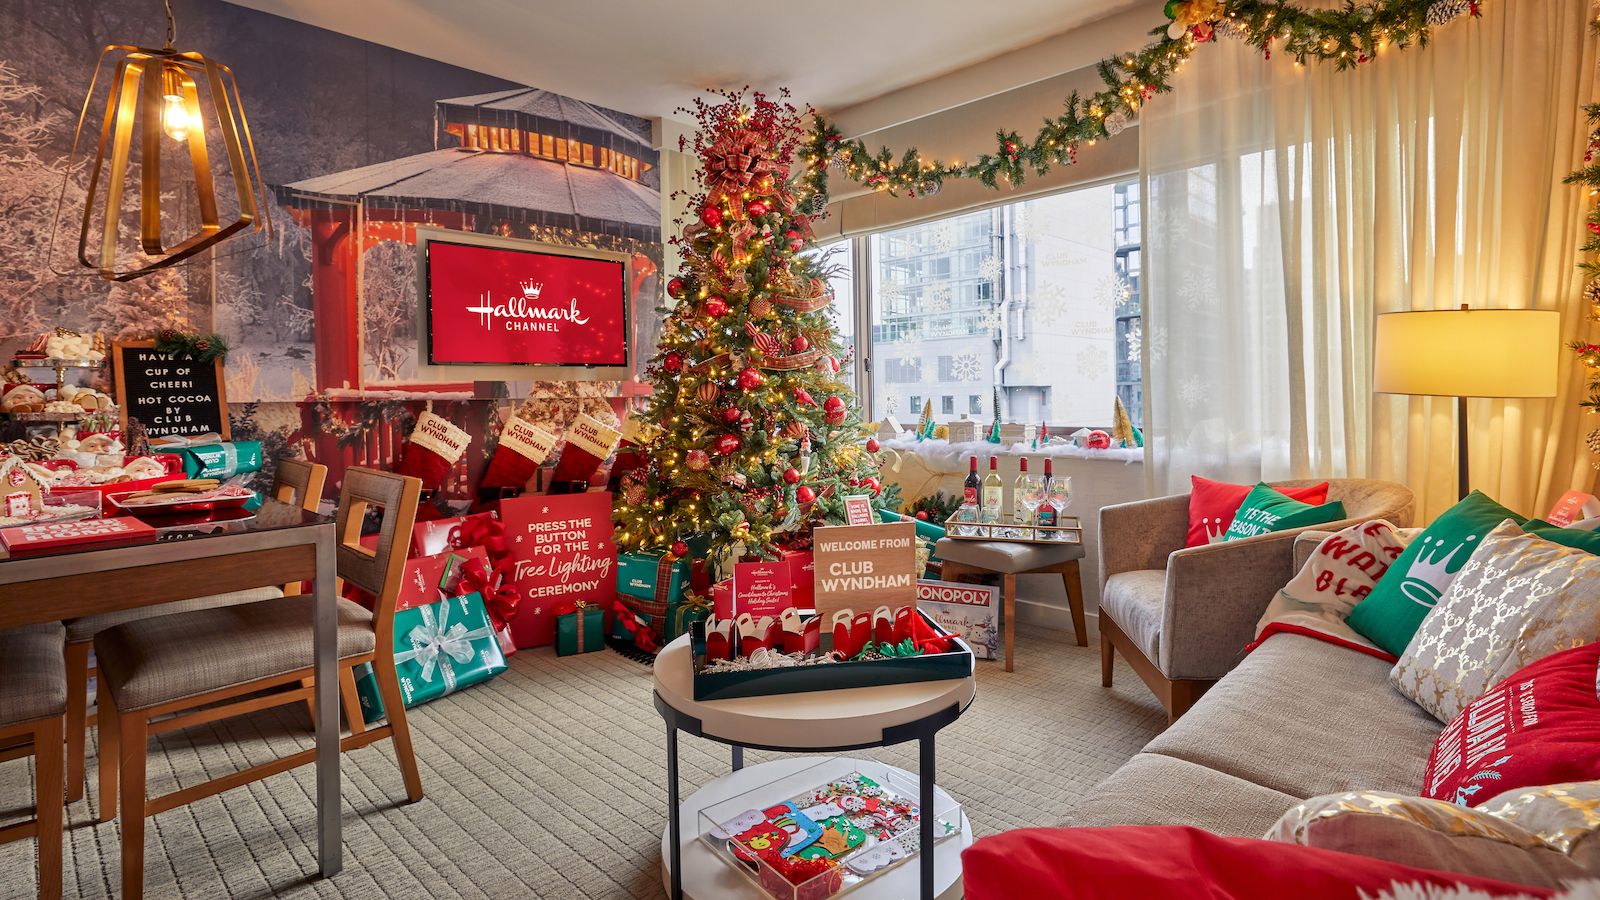 These Hotel Suites Are Inspired by Hallmark Christmas Movies